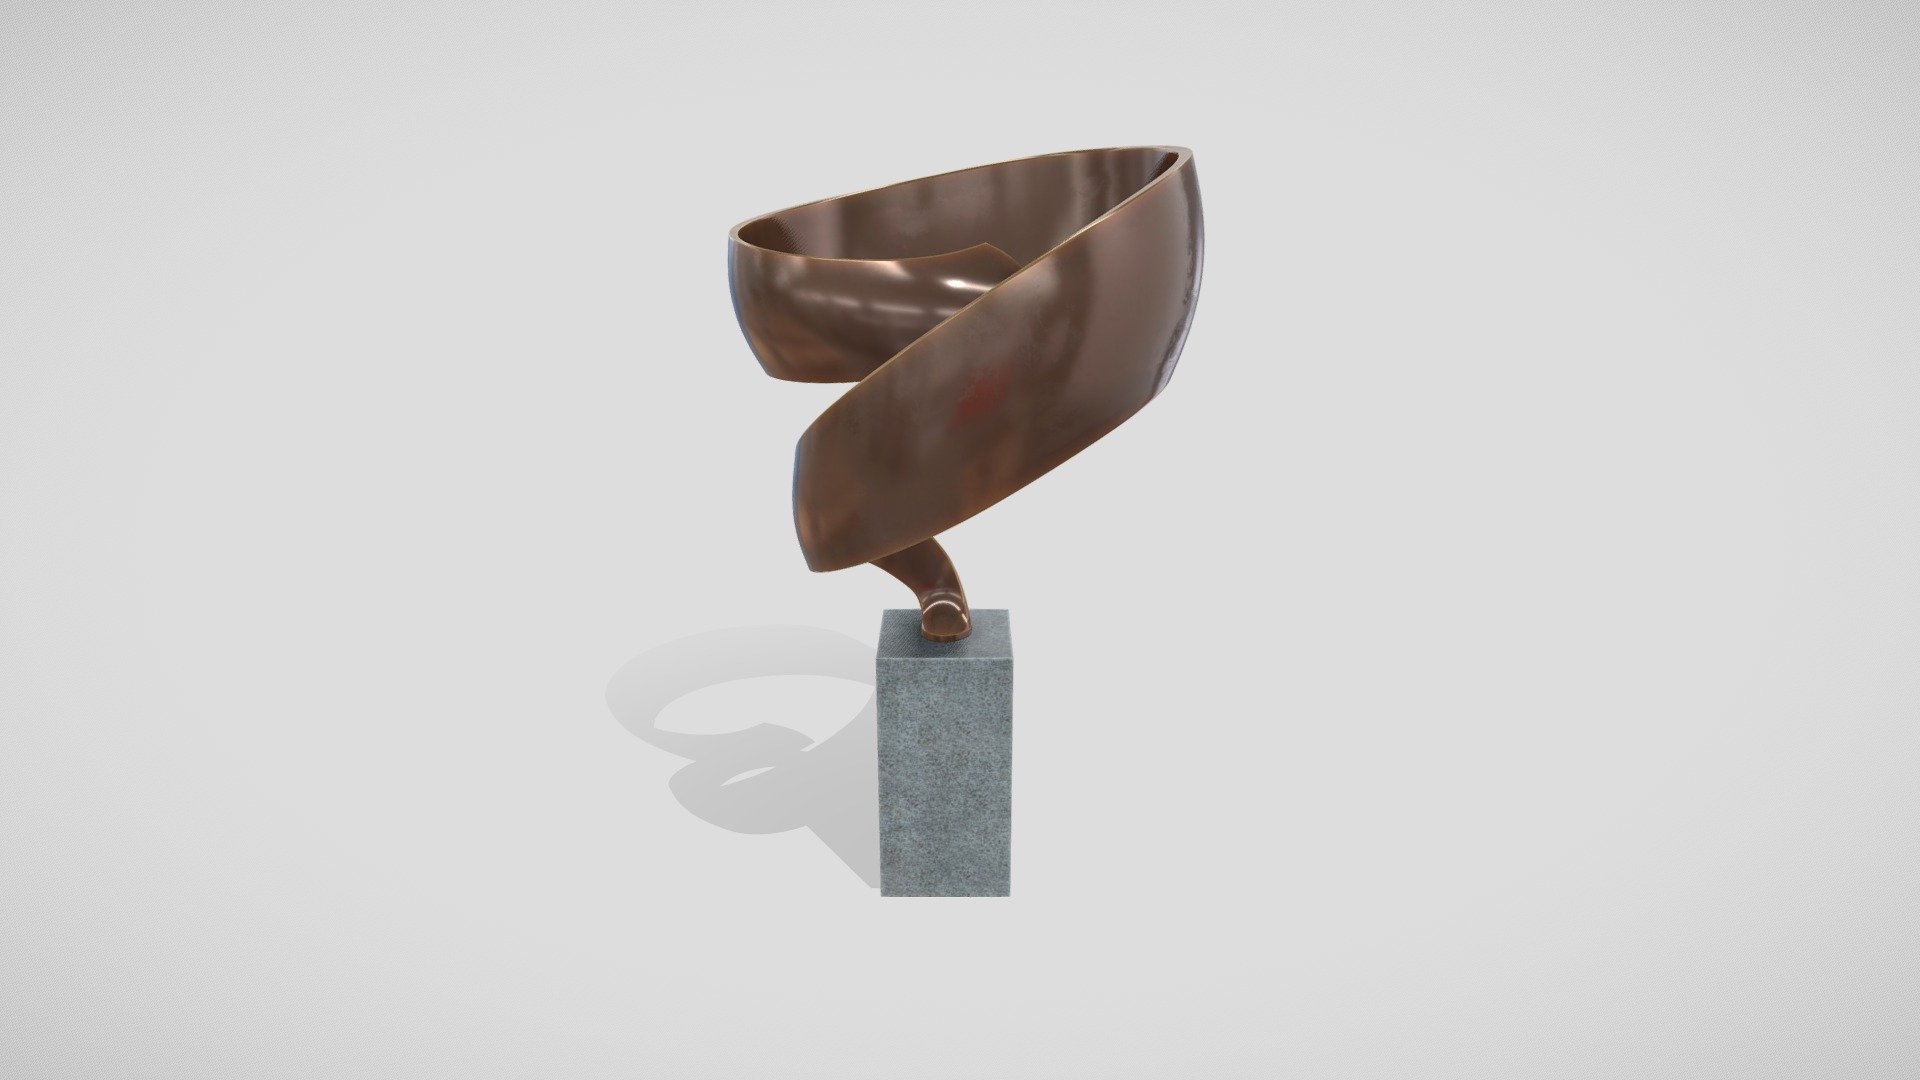 Modern Decorative Abstract Bronze Art Sculpture 29 Unwrapped with the full pack of textures and materials prepared for V-ray and Corona renderers.

Dimensions: 159,5 x 147 x H 248,3 cm

Material: Bronze, Granit

Textures: 8k (8192x8192) - Modern Abstract Bronze Art Sculpture 29 - 3D model by gogoskilla 3d model